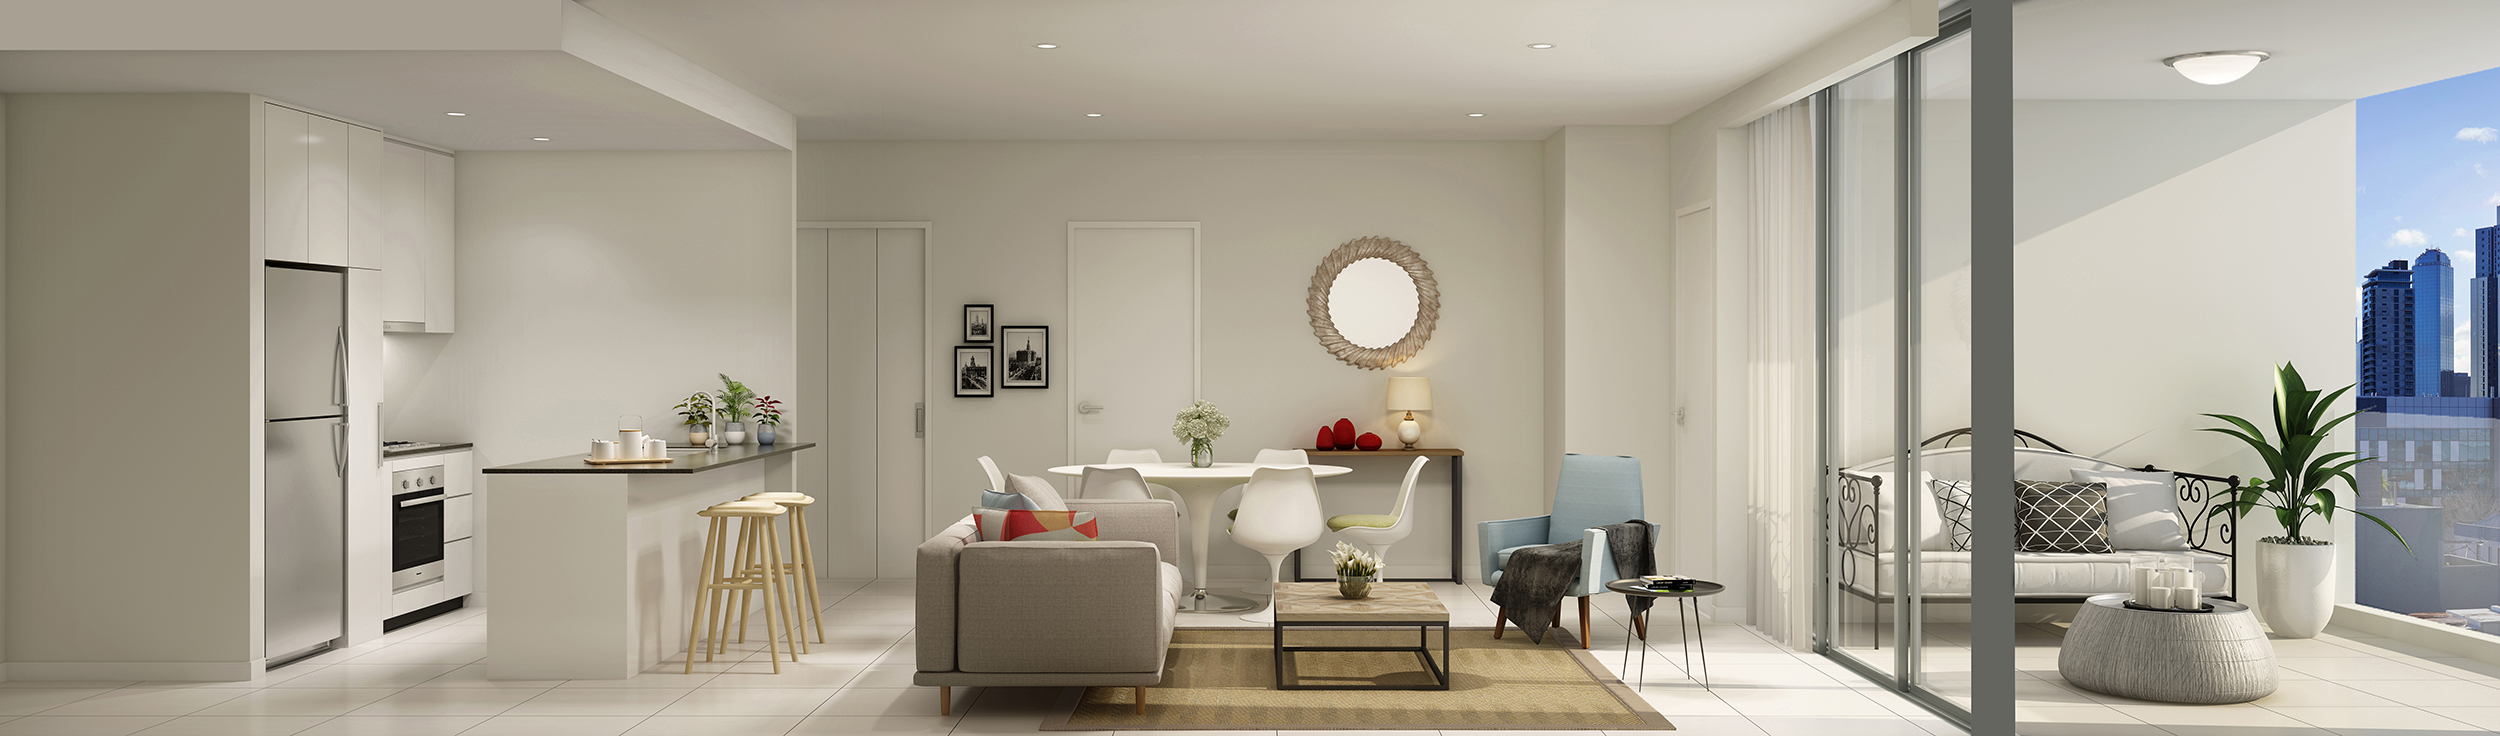 cross section of a living space within the winn showing an open plan living area